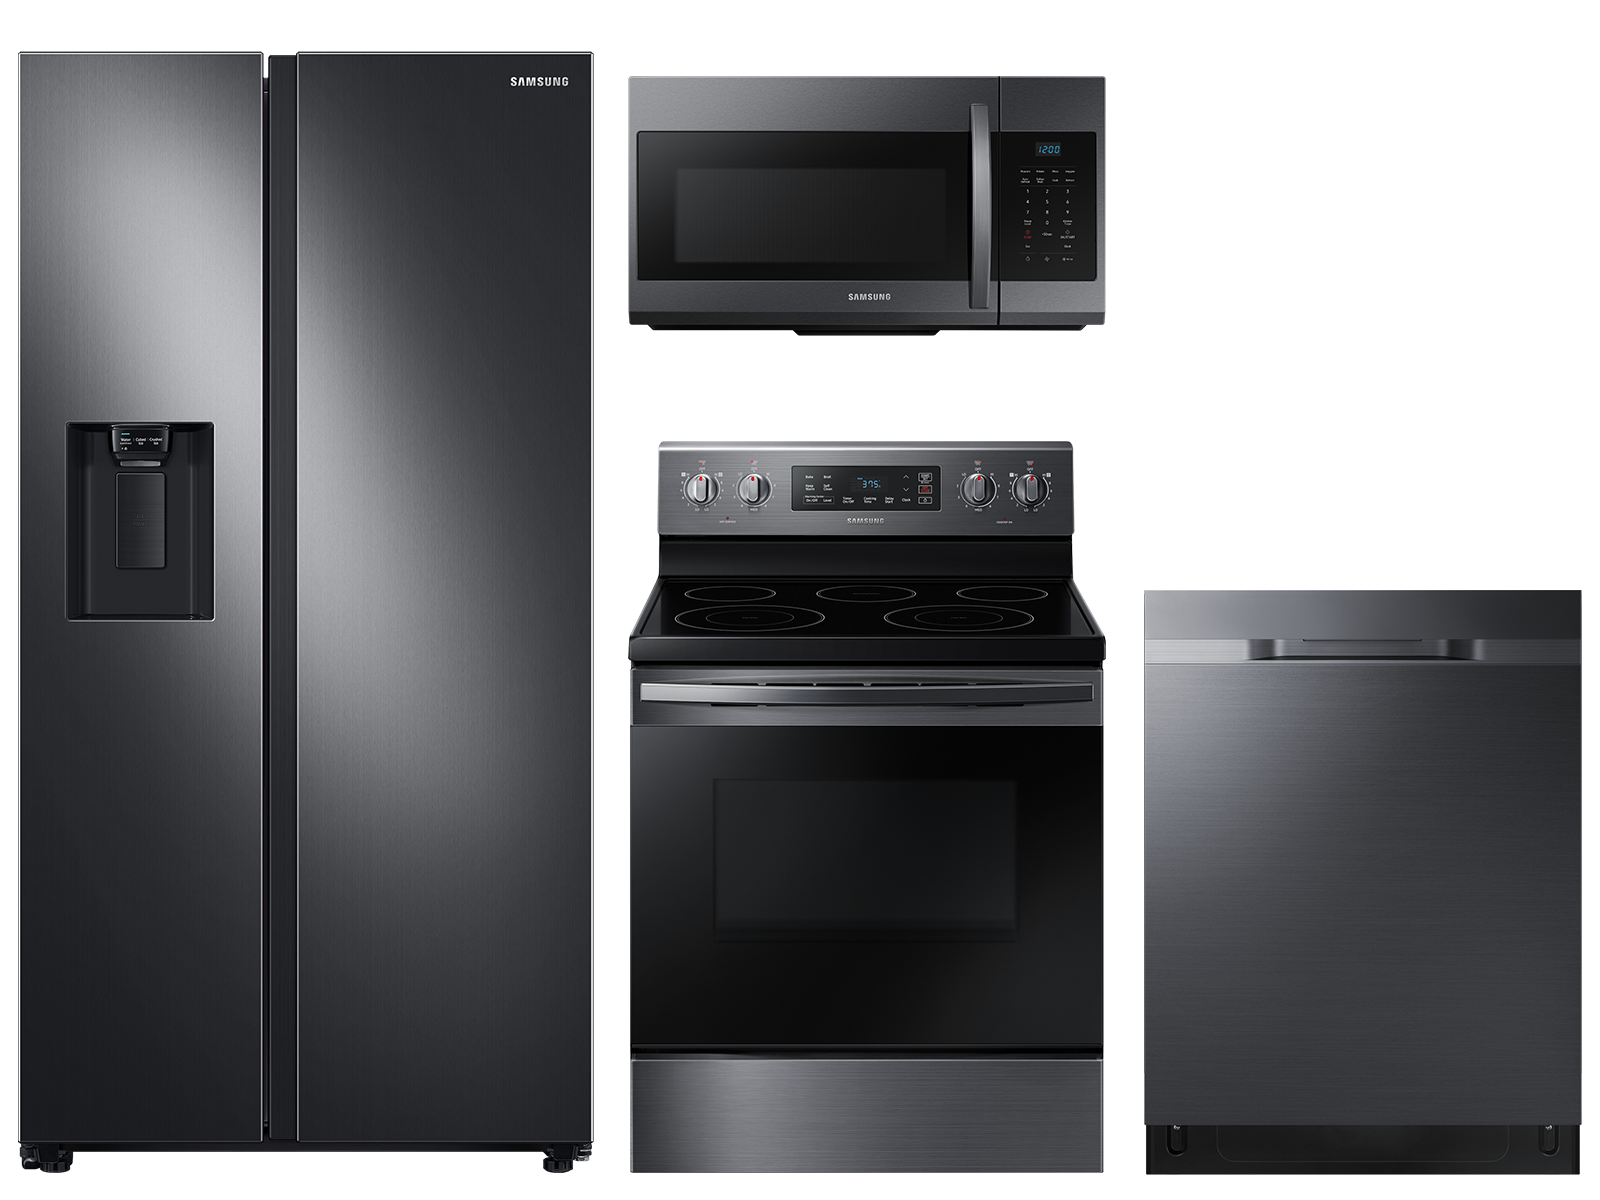 Samsung Large capacity Side-by-Side refrigerator & electric range package in Black stainless(BNDL-1646991127826)